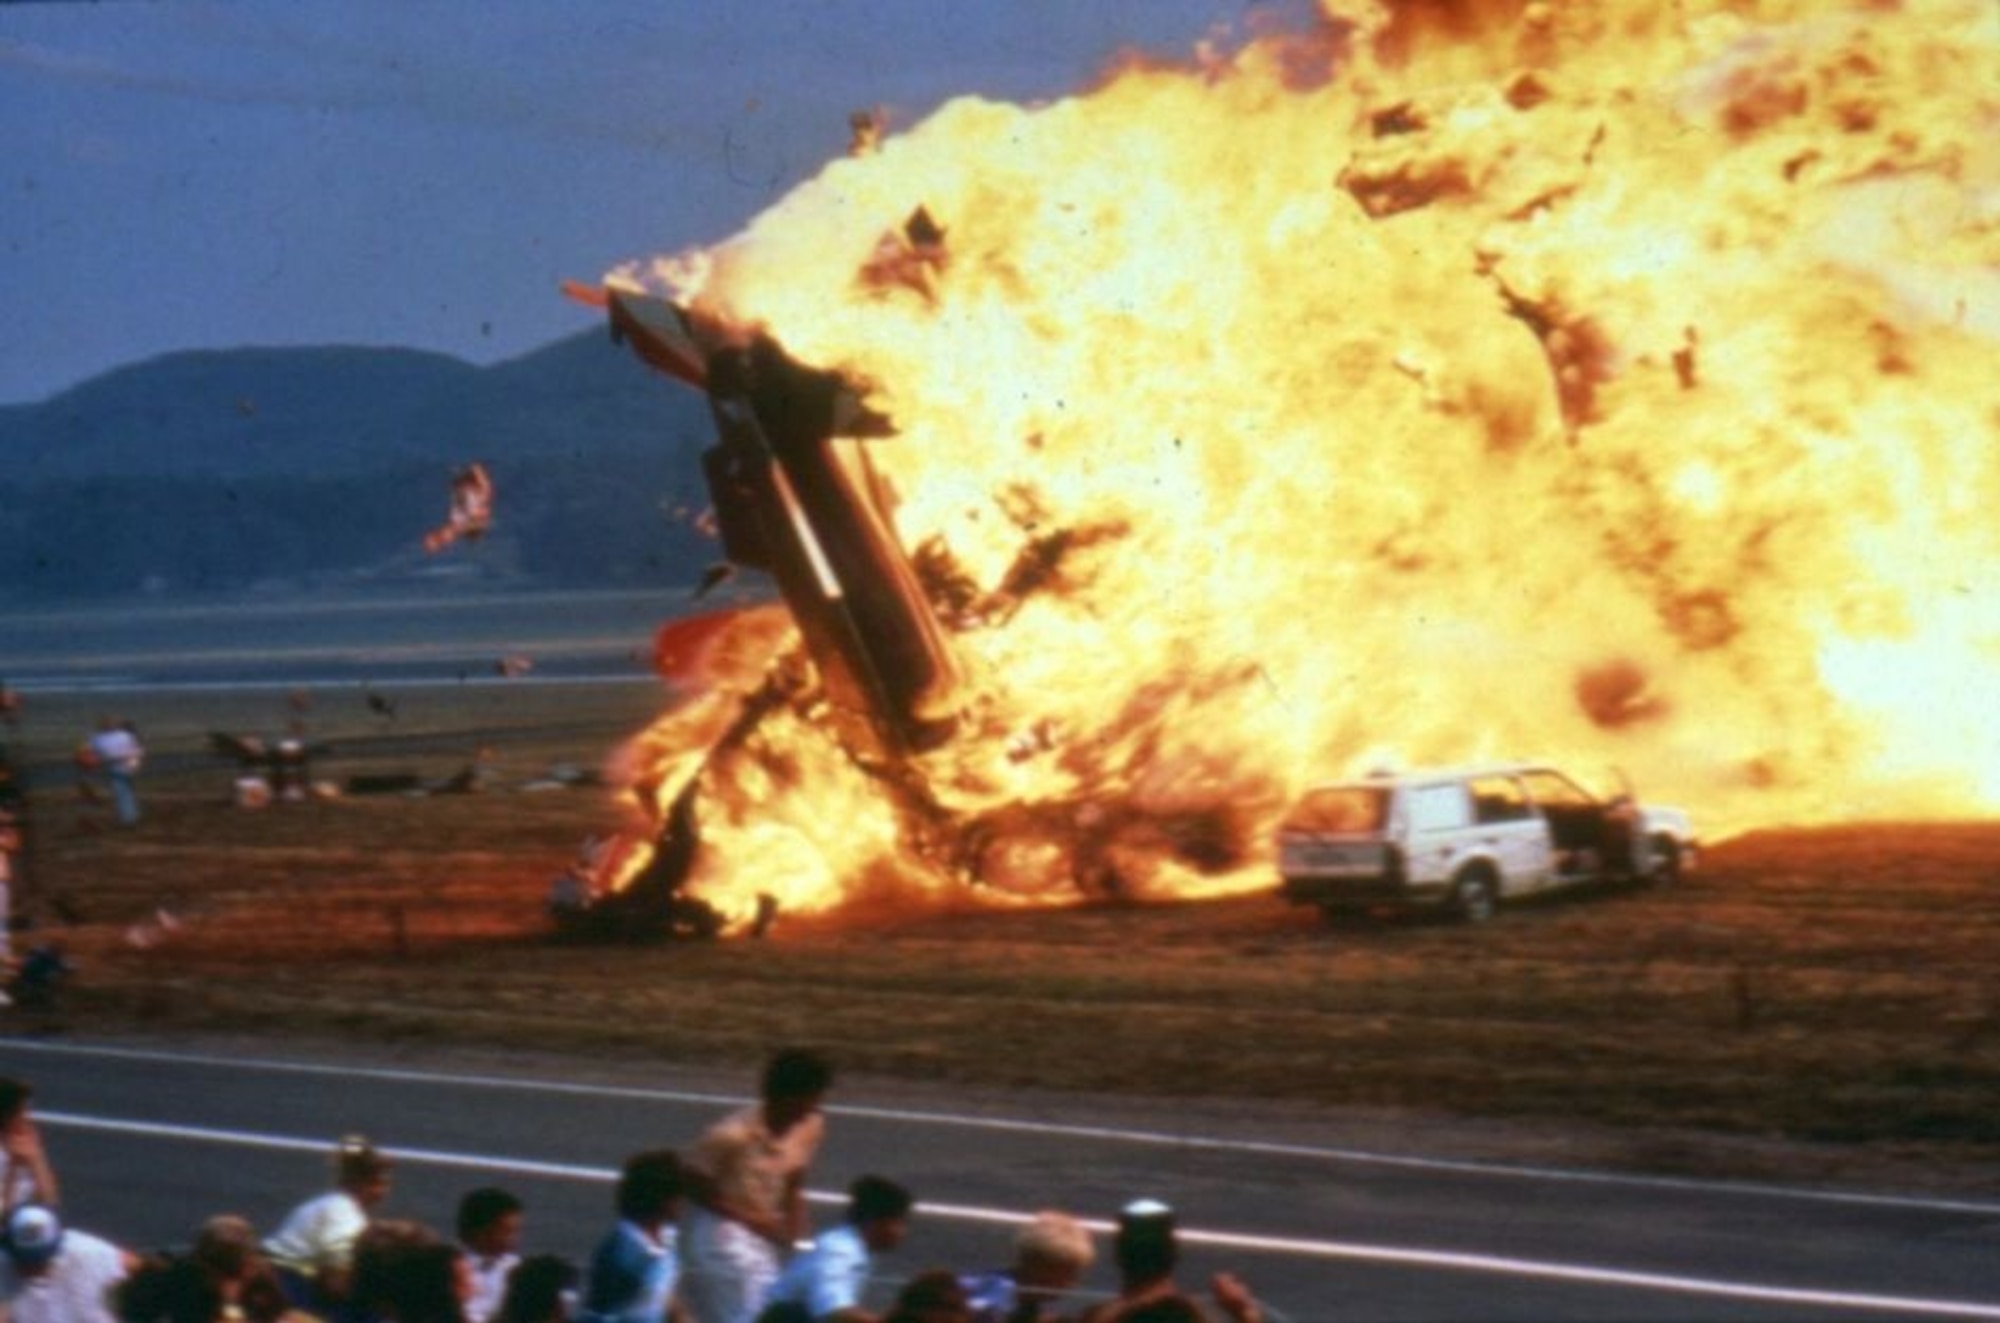 Approximately 300,000 spectators, who gathered at   Ramstein Air Base, Germany, on Aug. 28. 1988, to view the “Flugtag ‘88” Airshow, witnessed what at that time, was the the deadliest air show accident in world history, killing 70 people. (Courtesy photo)